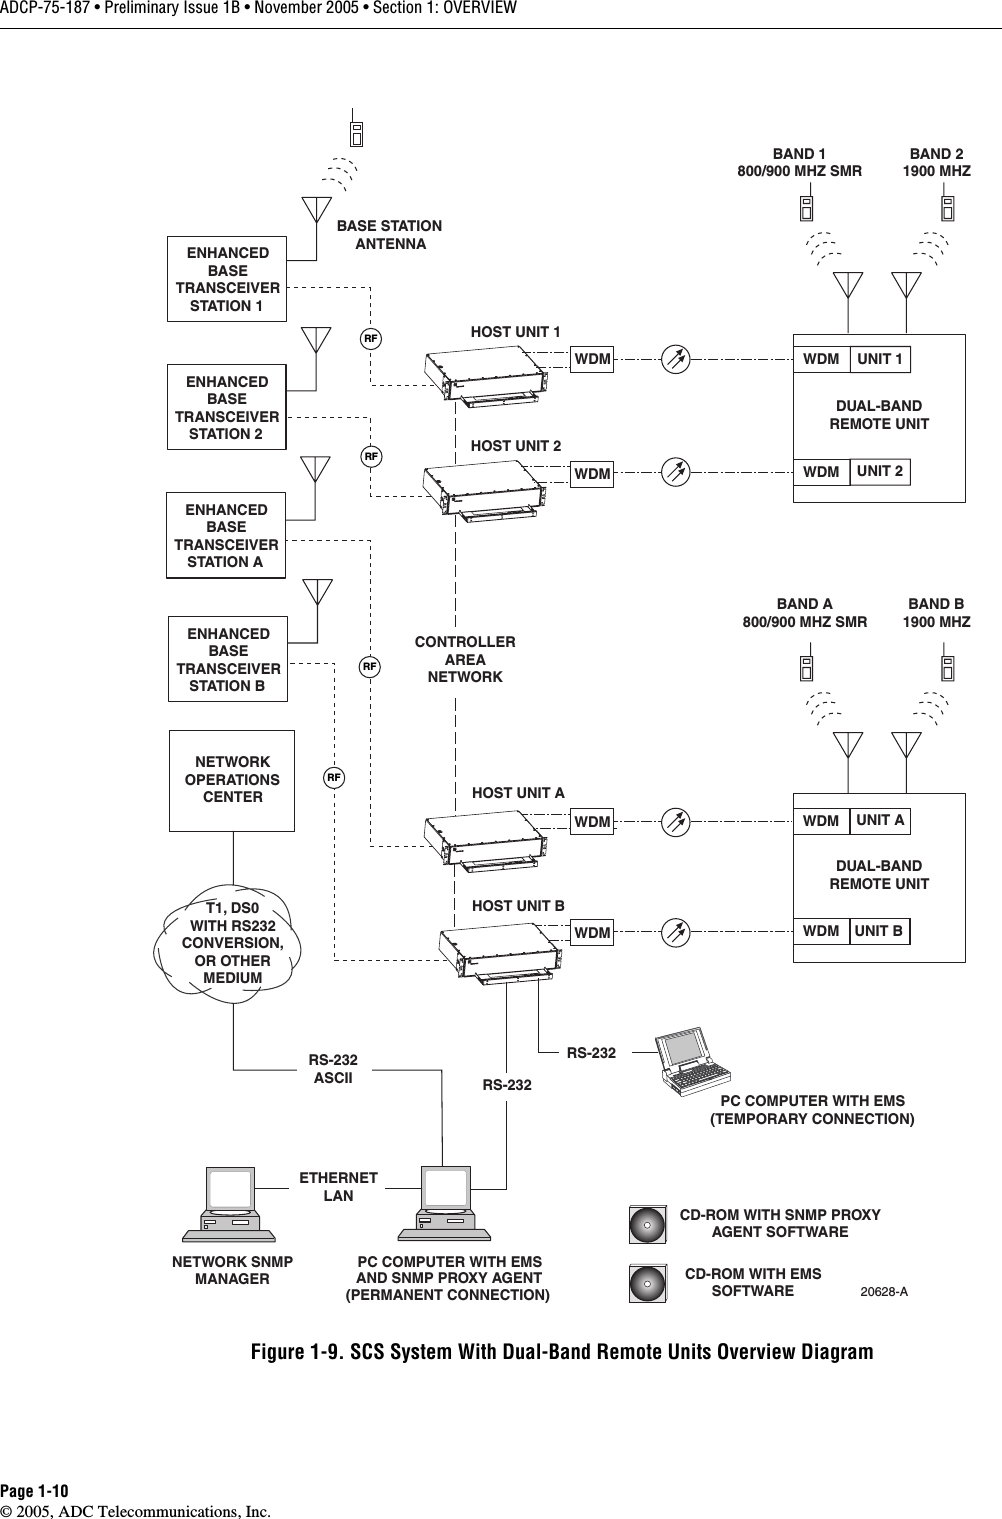 ADCP-75-187 • Preliminary Issue 1B • November 2005 • Section 1: OVERVIEWPage 1-10© 2005, ADC Telecommunications, Inc.Figure 1-9. SCS System With Dual-Band Remote Units Overview DiagramPC COMPUTER WITH EMSAND SNMP PROXY AGENT(PERMANENT CONNECTION) HOST UNIT 1HOST UNIT 2HOST UNIT AHOST UNIT BNETWORKOPERATIONSCENTERPC COMPUTER WITH EMS(TEMPORARY CONNECTION)T1, DS0WITH RS232CONVERSION,OR OTHERMEDIUMRS-232ASCII RS-23220628-ACD-ROM WITH EMSSOFTWARERFRS-232NETWORK SNMPMANAGERCD-ROM WITH SNMP PROXYAGENT SOFTWAREETHERNETLANDUAL-BANDREMOTE UNITDUAL-BANDREMOTE UNITCONTROLLERAREANETWORKBAND 1800/900 MHZ SMRBAND A800/900 MHZ SMRBAND 21900 MHZBAND B1900 MHZBASE STATIONANTENNAENHANCEDBASETRANSCEIVERSTATION 1ENHANCEDBASETRANSCEIVERSTATION 2ENHANCEDBASETRANSCEIVERSTATION BENHANCEDBASETRANSCEIVERSTATION ARFRFRFUNIT 1UNIT 2UNIT AUNIT BWDMWDMWDMWDMWDMWDMWDMWDM